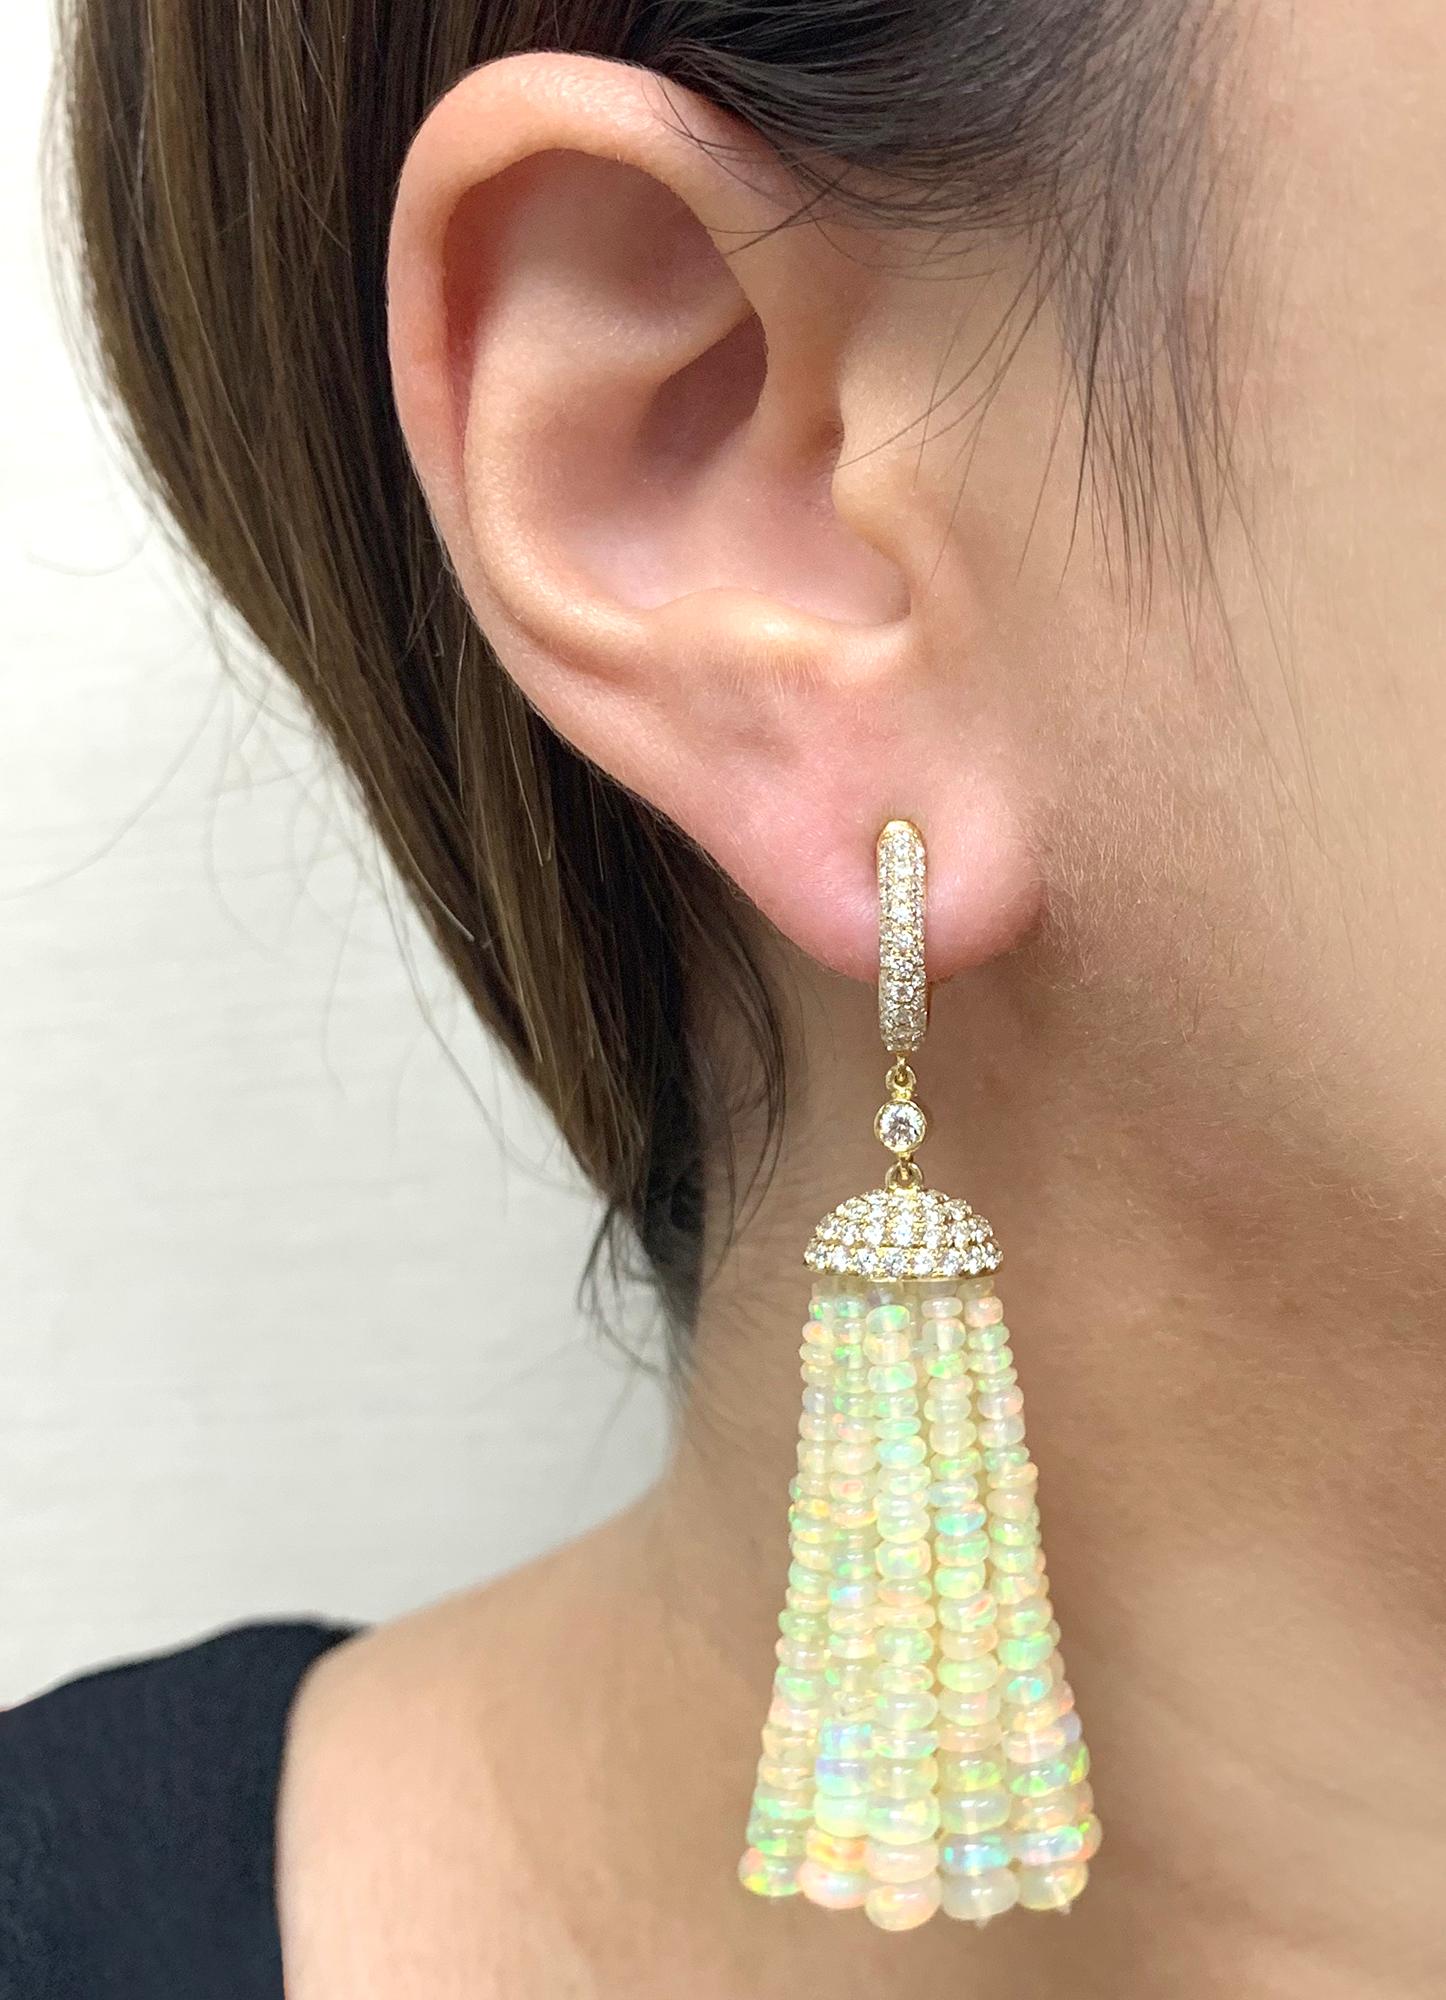 Bead Tassel Earrings with 14 Opal Strands, Diamonds, Briolettes & Diamonds Hoop in 18K Yellow Gold, from 'G-One' Collection

Tassel Length: 1-1/2